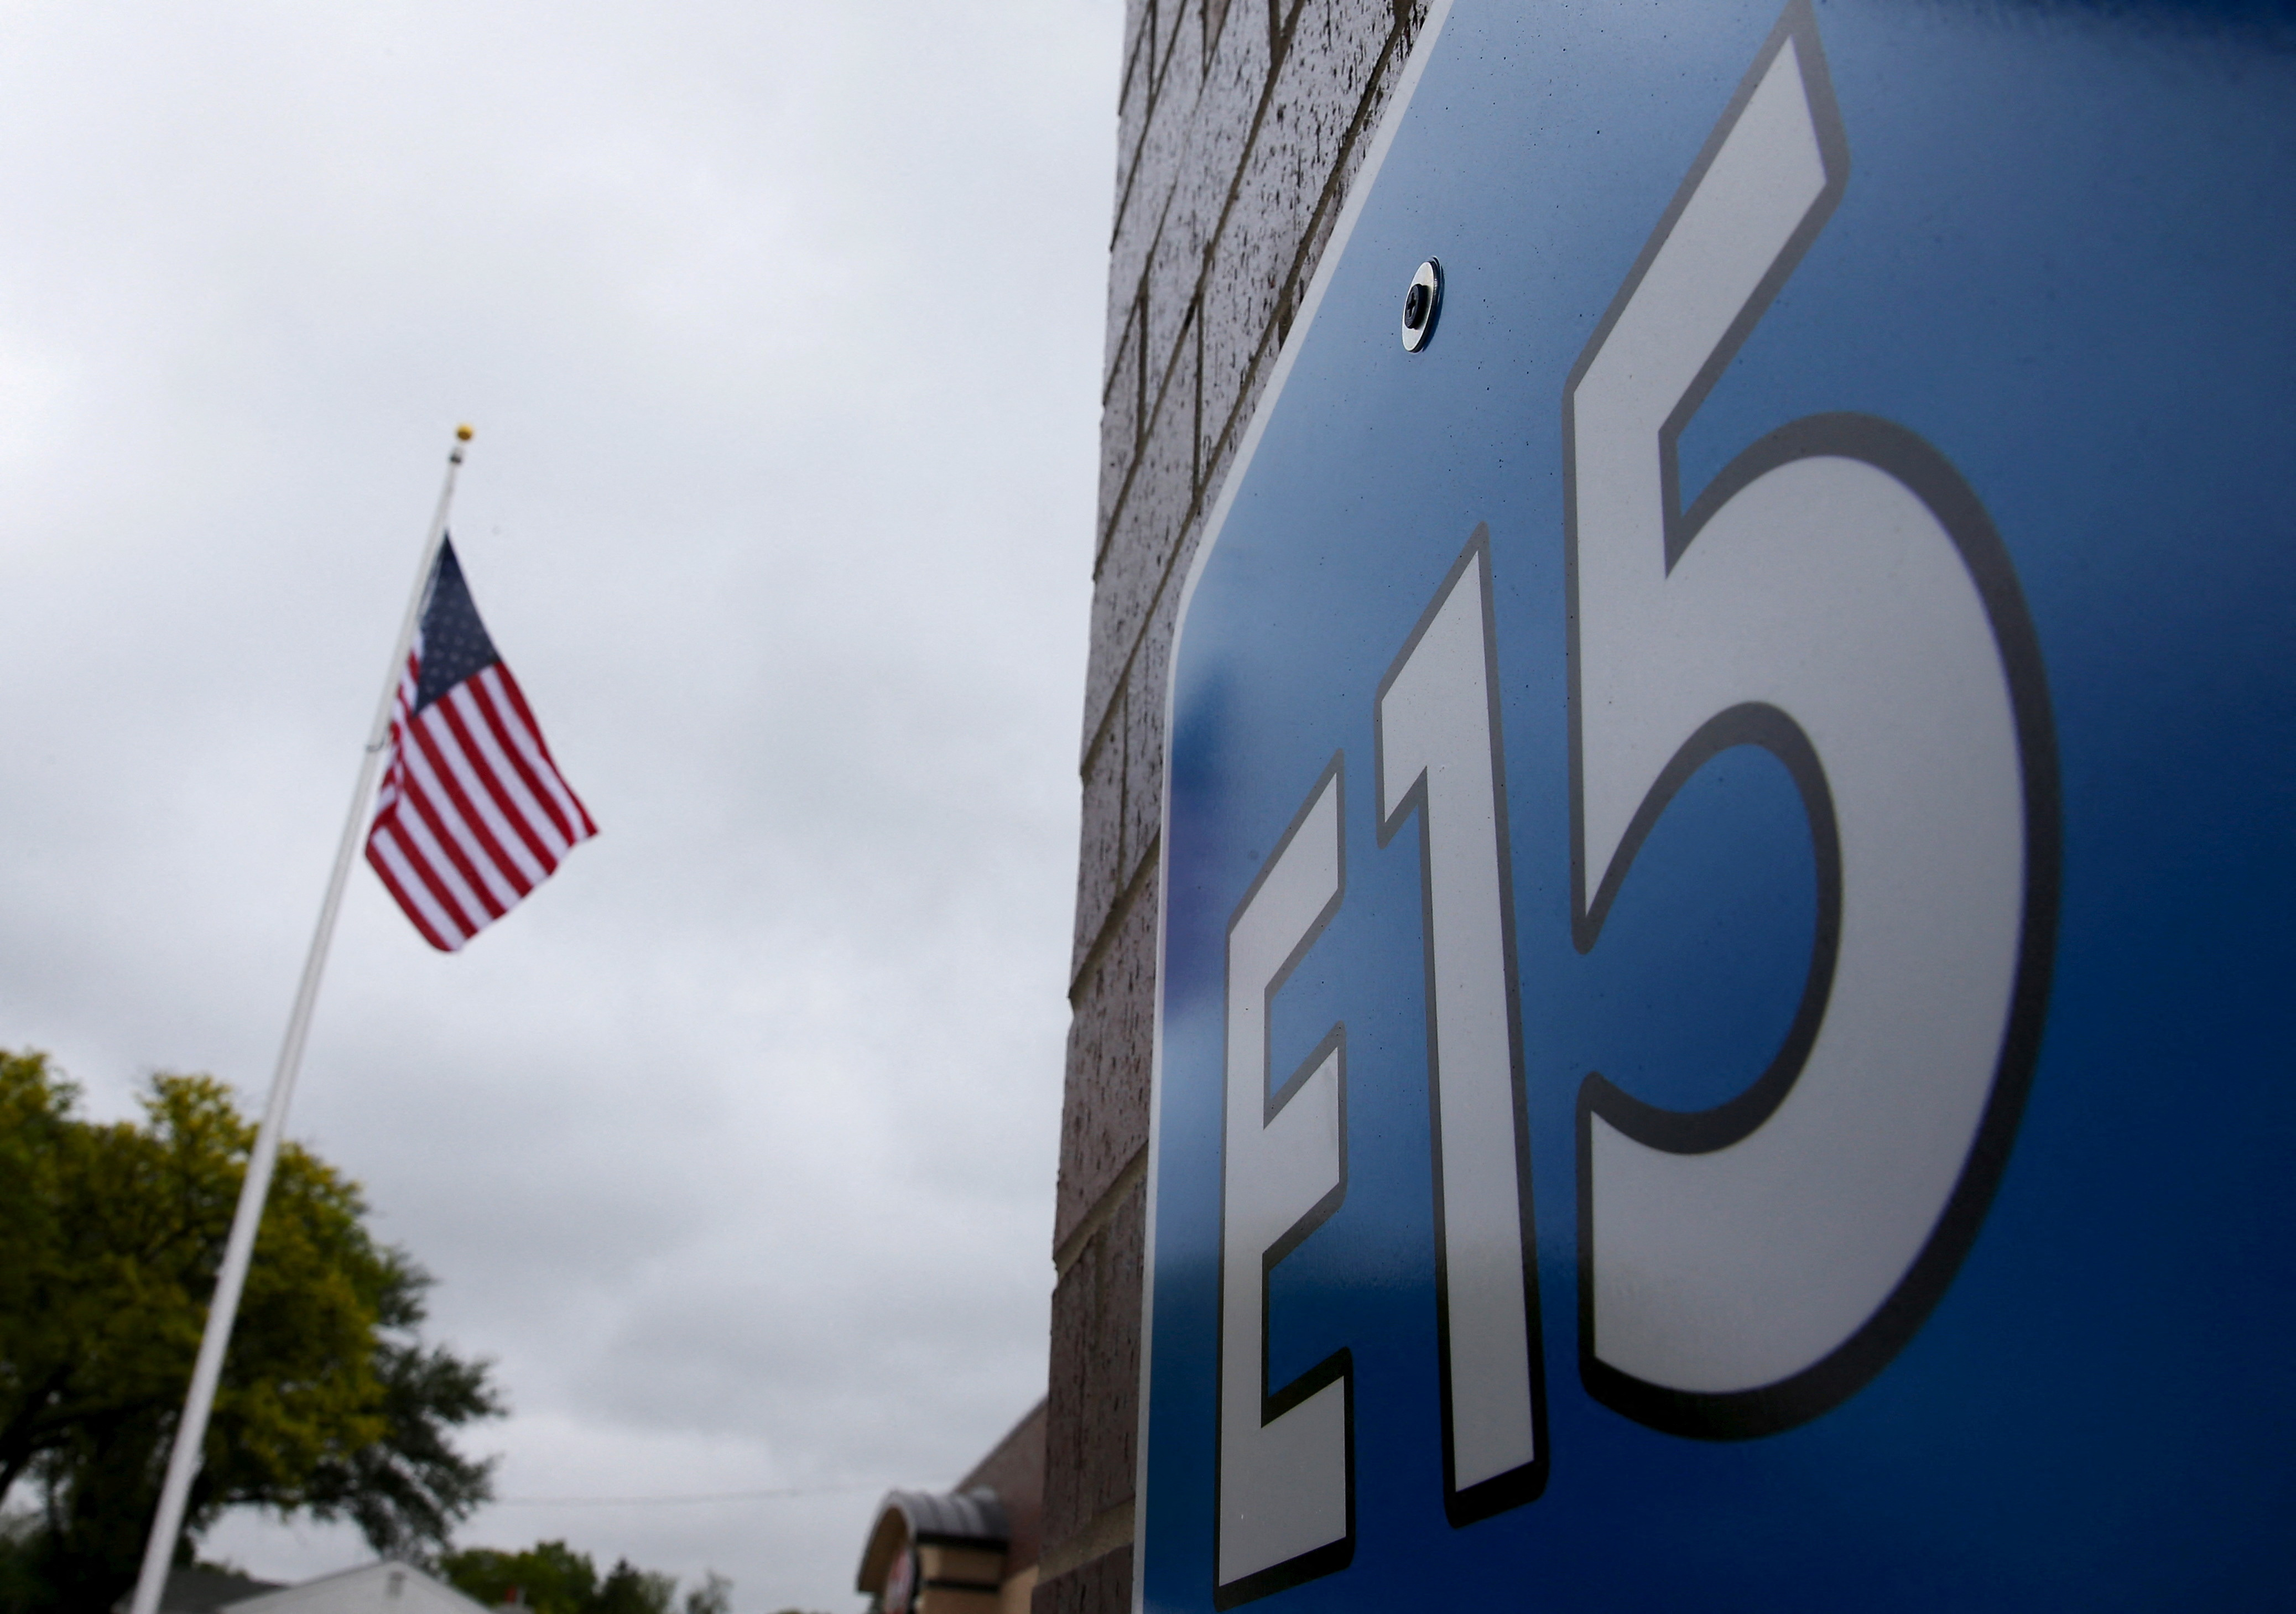 A sign advertising E15, a gasoline that contains 15% ethanol, is seen at a gas station in Clive